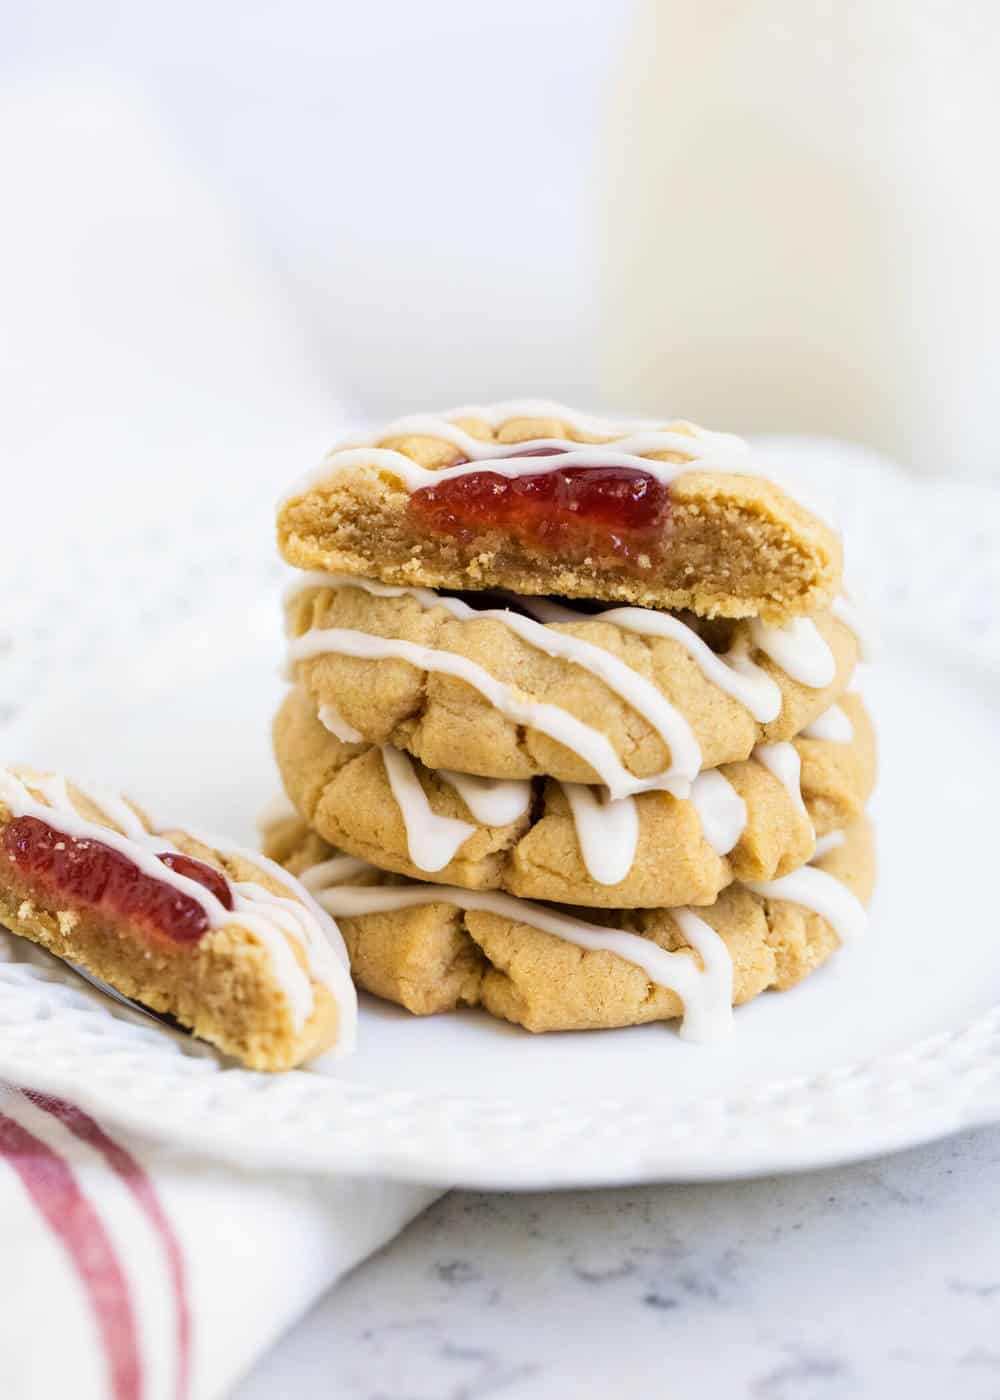 Stacked peanut butter and jelly cookies on white plate.